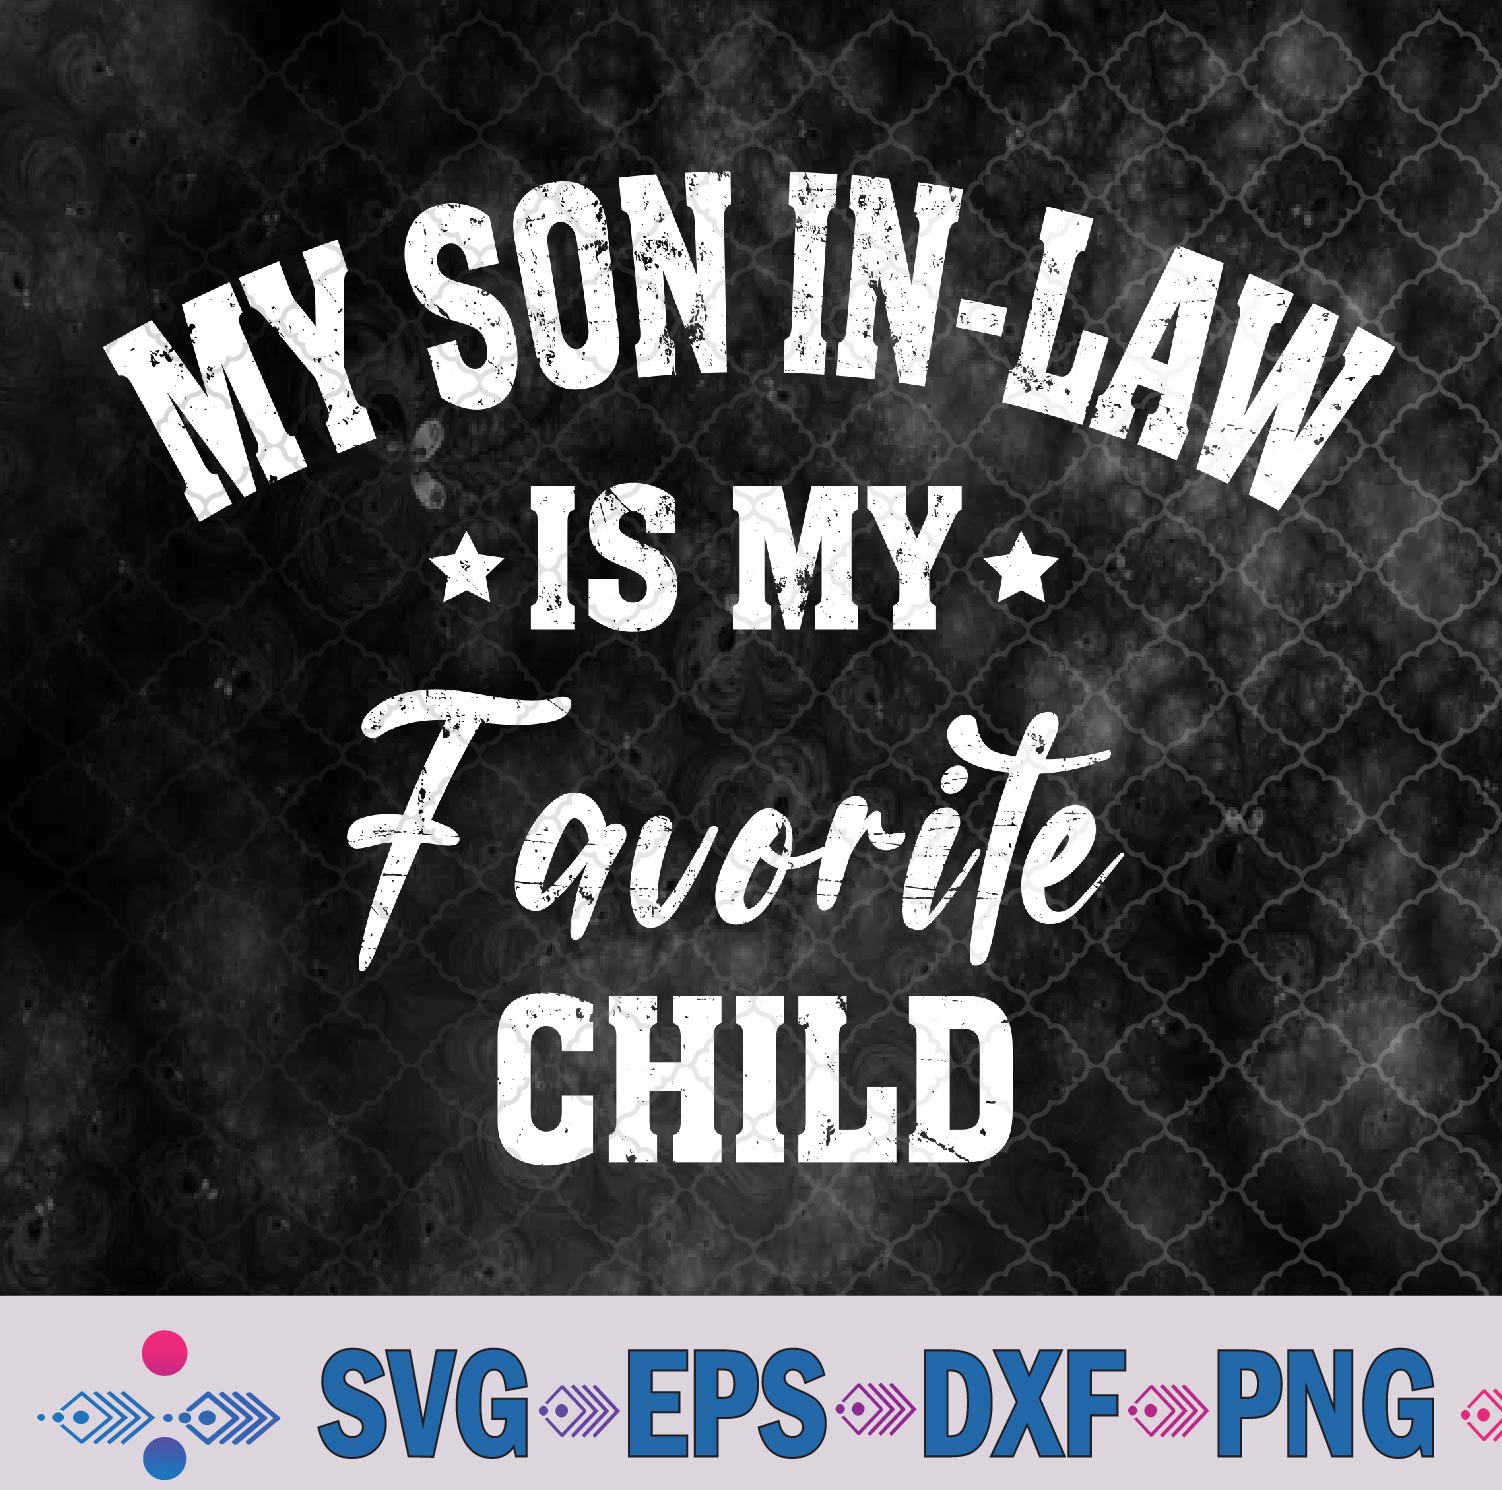 WTMNEW9file 09 11 My Son In Law Is My Favorite Child Funny Mother's Day Retro Svg, Png, Digital Download